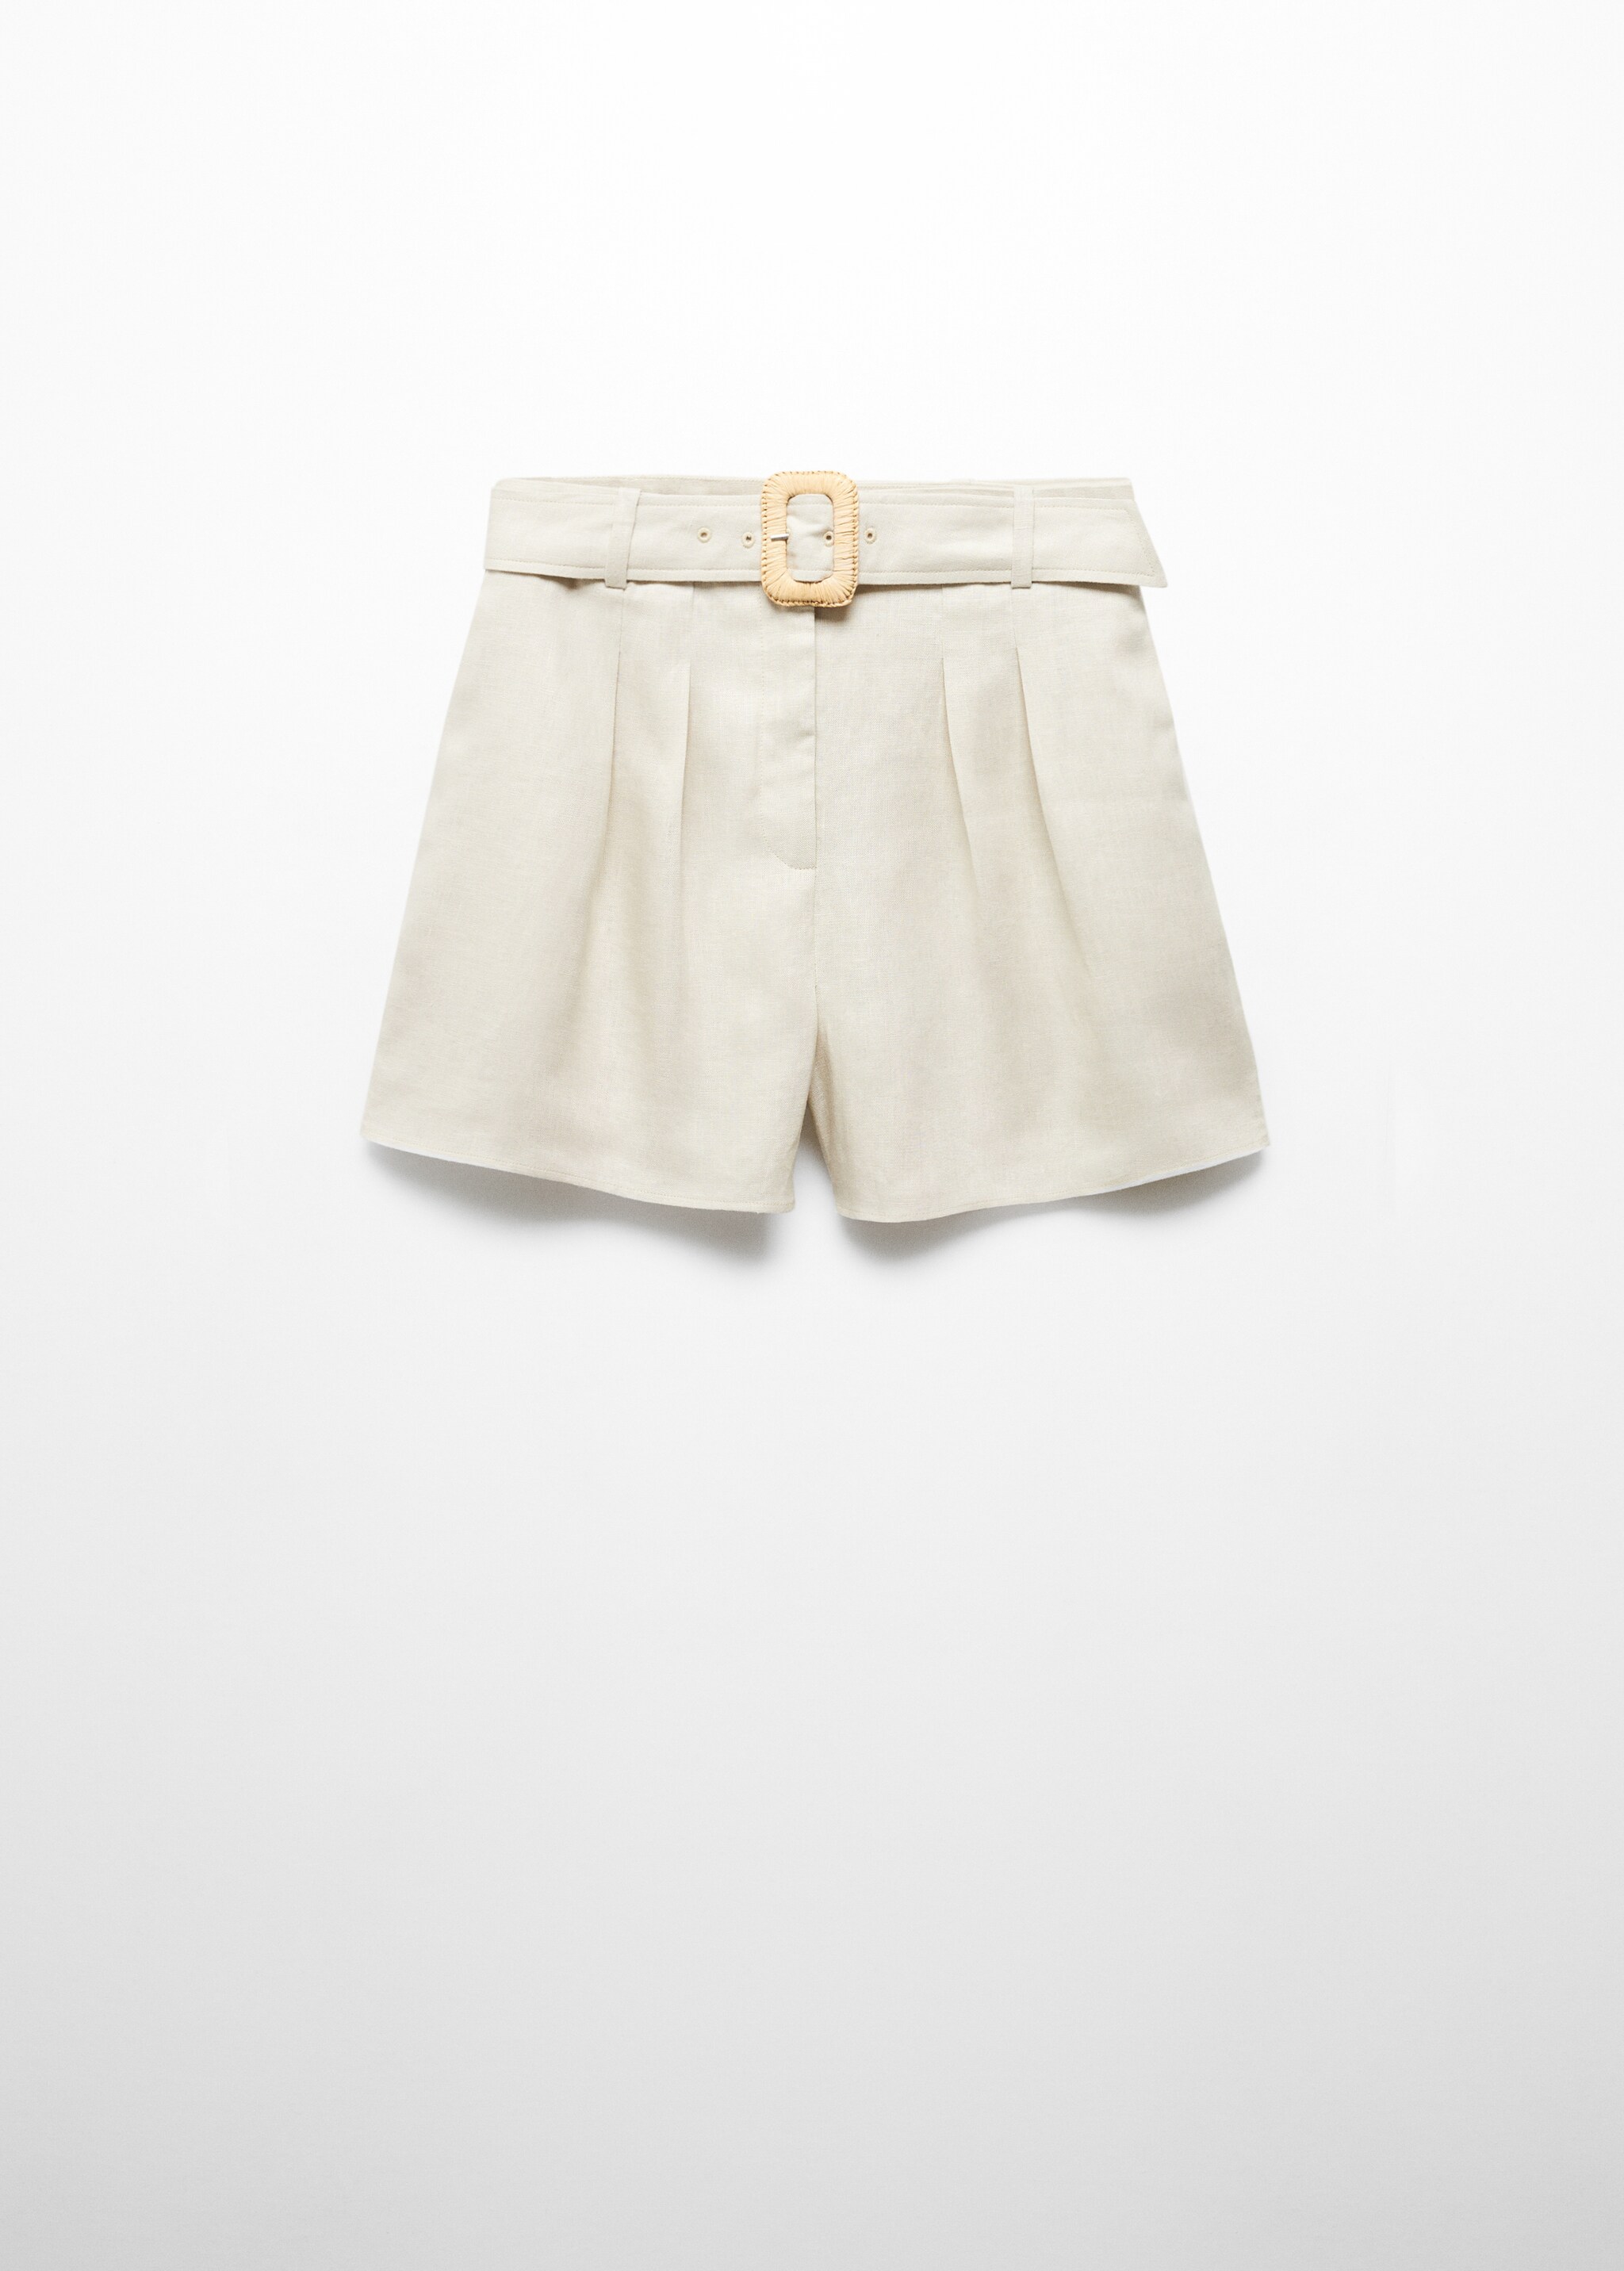 Linen shorts with belt - Article without model